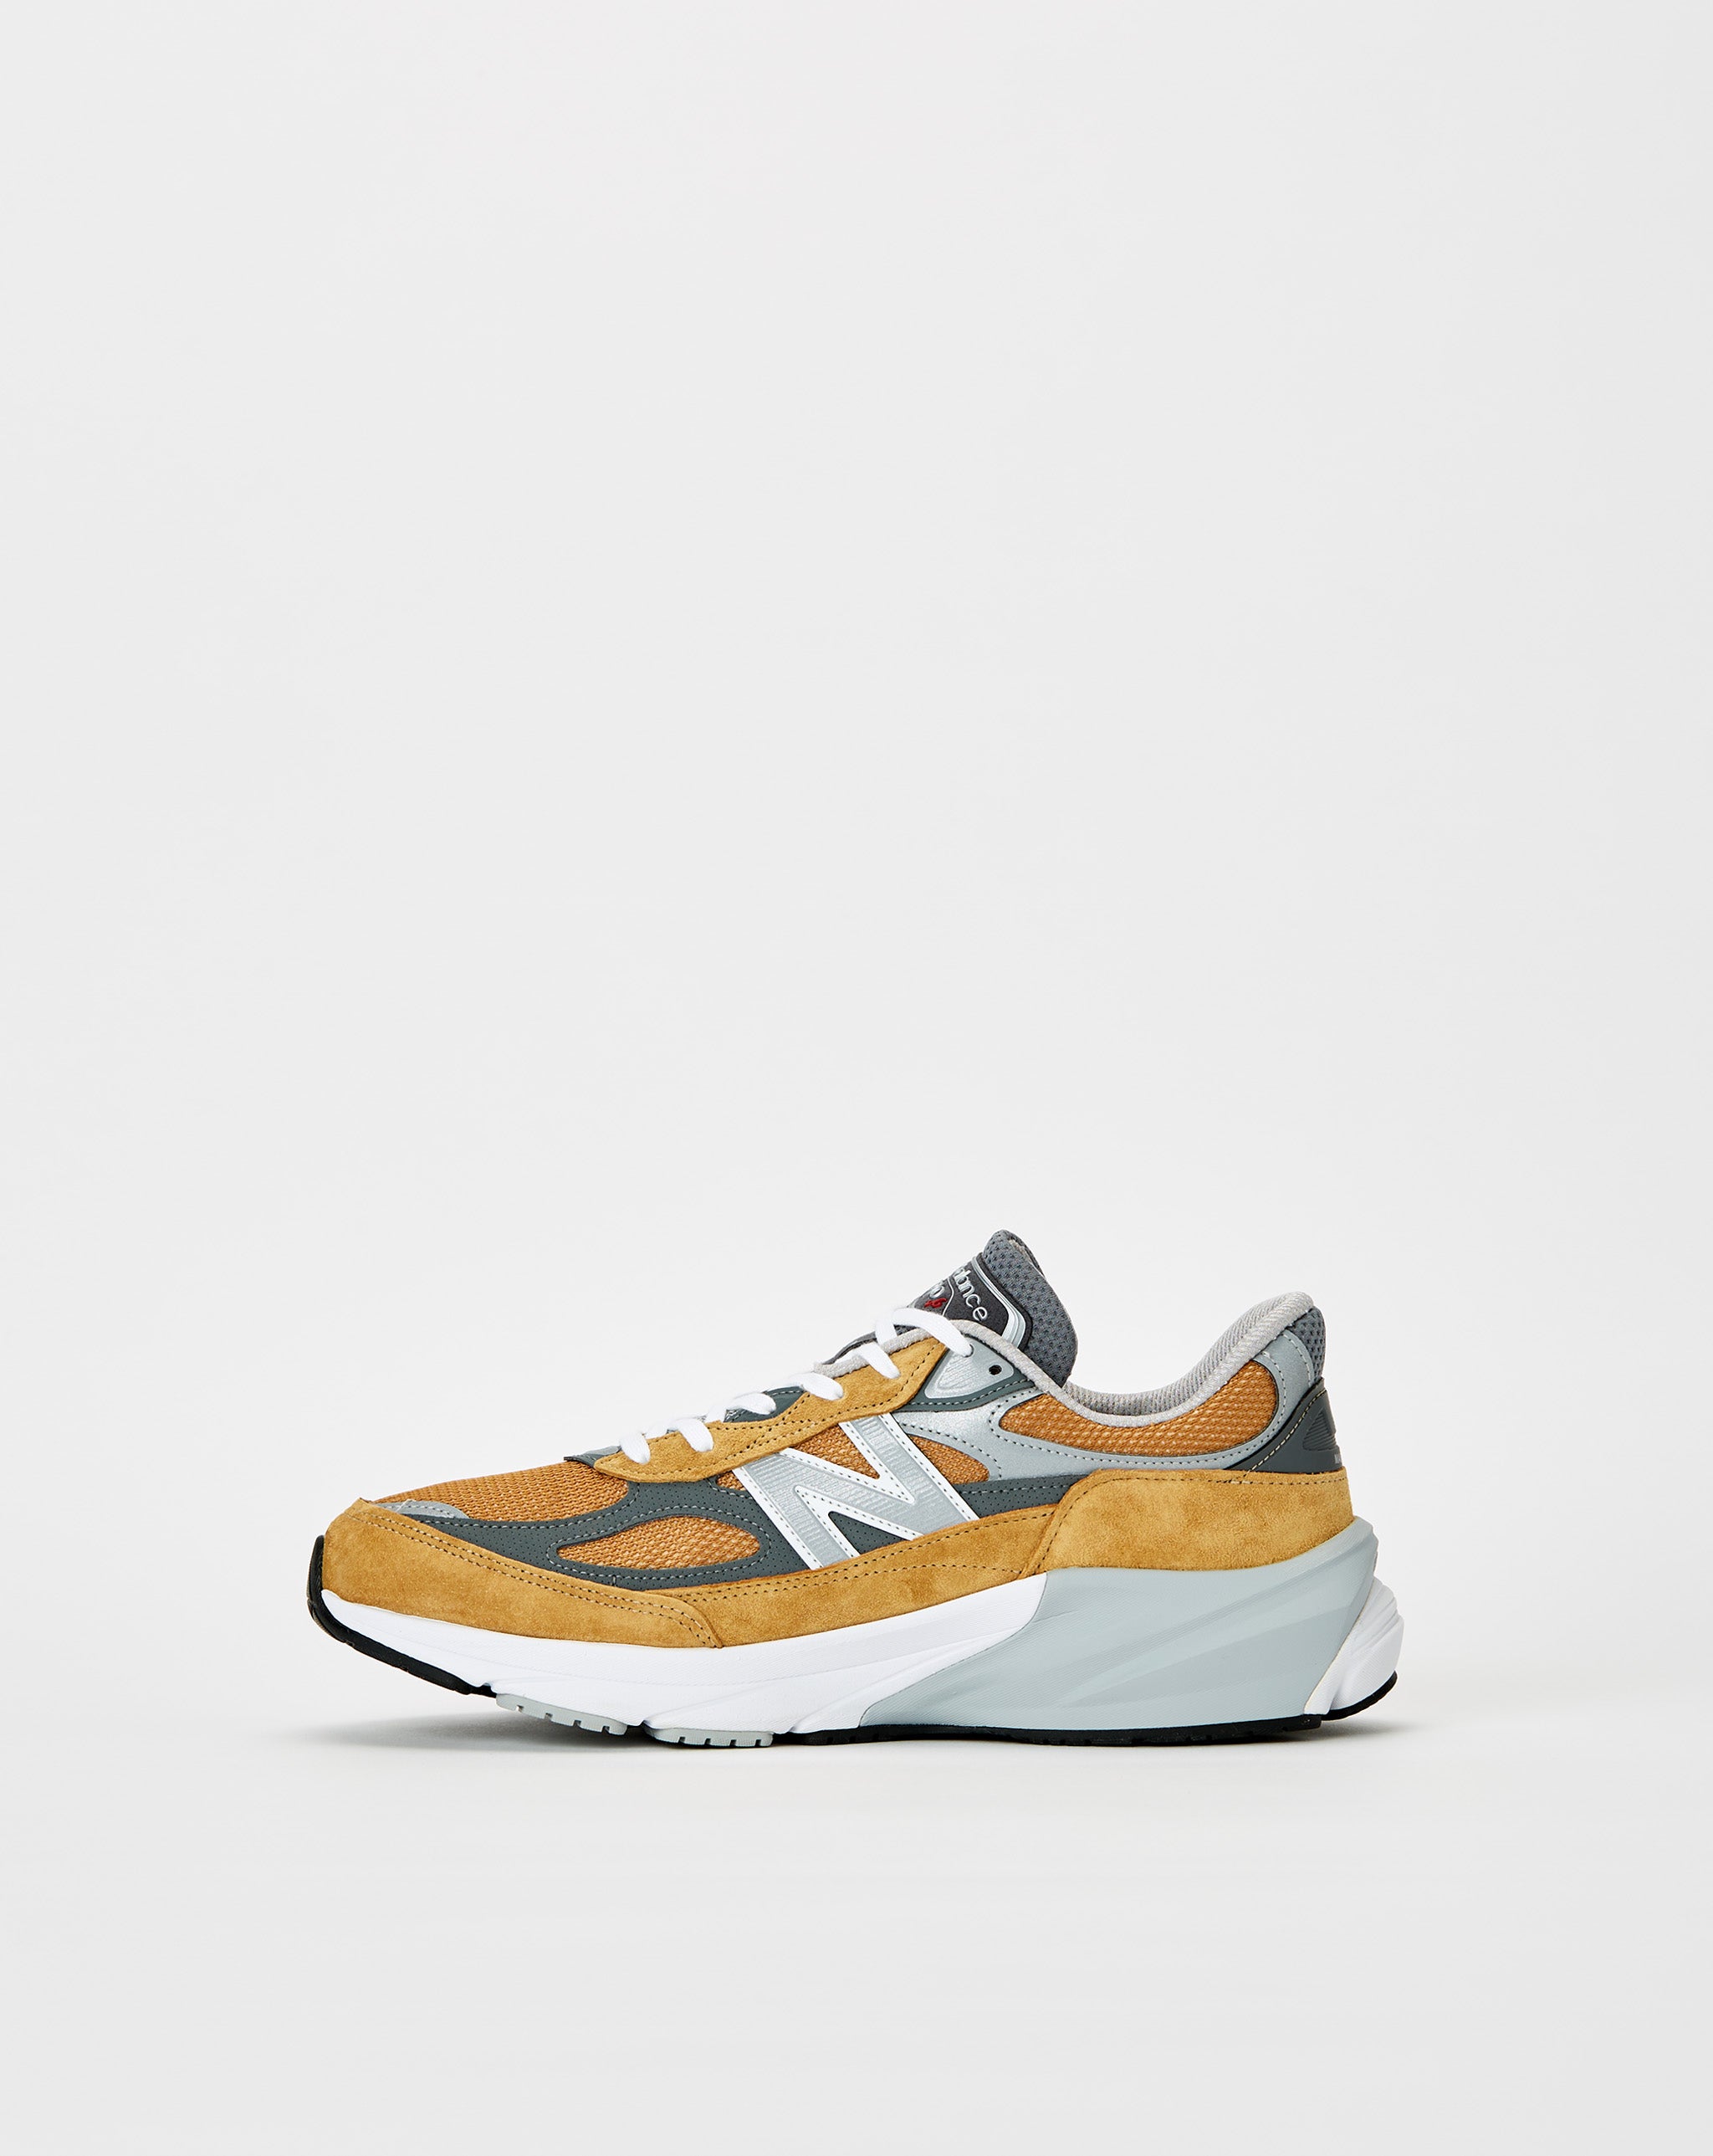 New Balance Made in USA 990v6  - Cheap Atelier-lumieres Jordan outlet